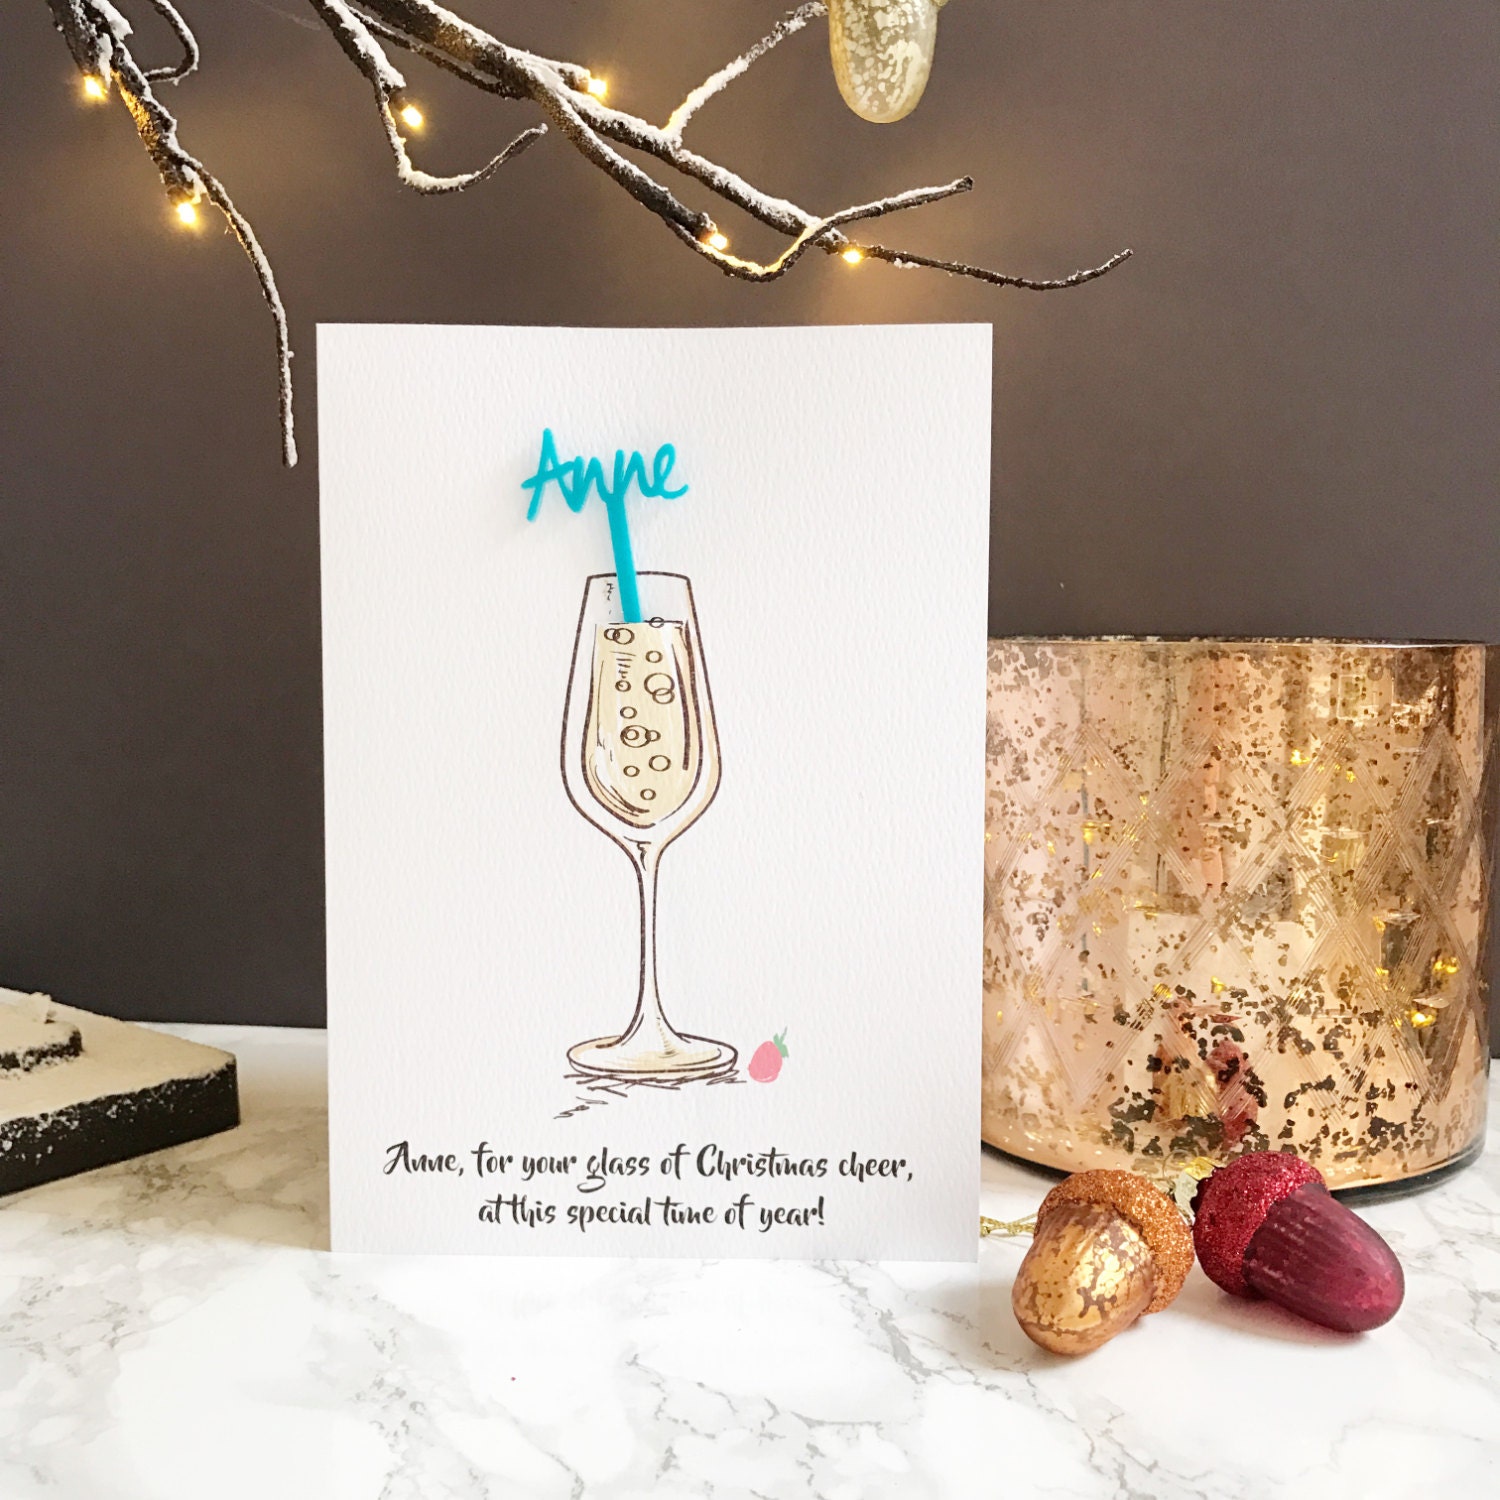 Personalised Swizzle Stick Christmas Card-personalised Christmas card-Christmas card with cocktail stirrer-Christmas card and drinks stirrer